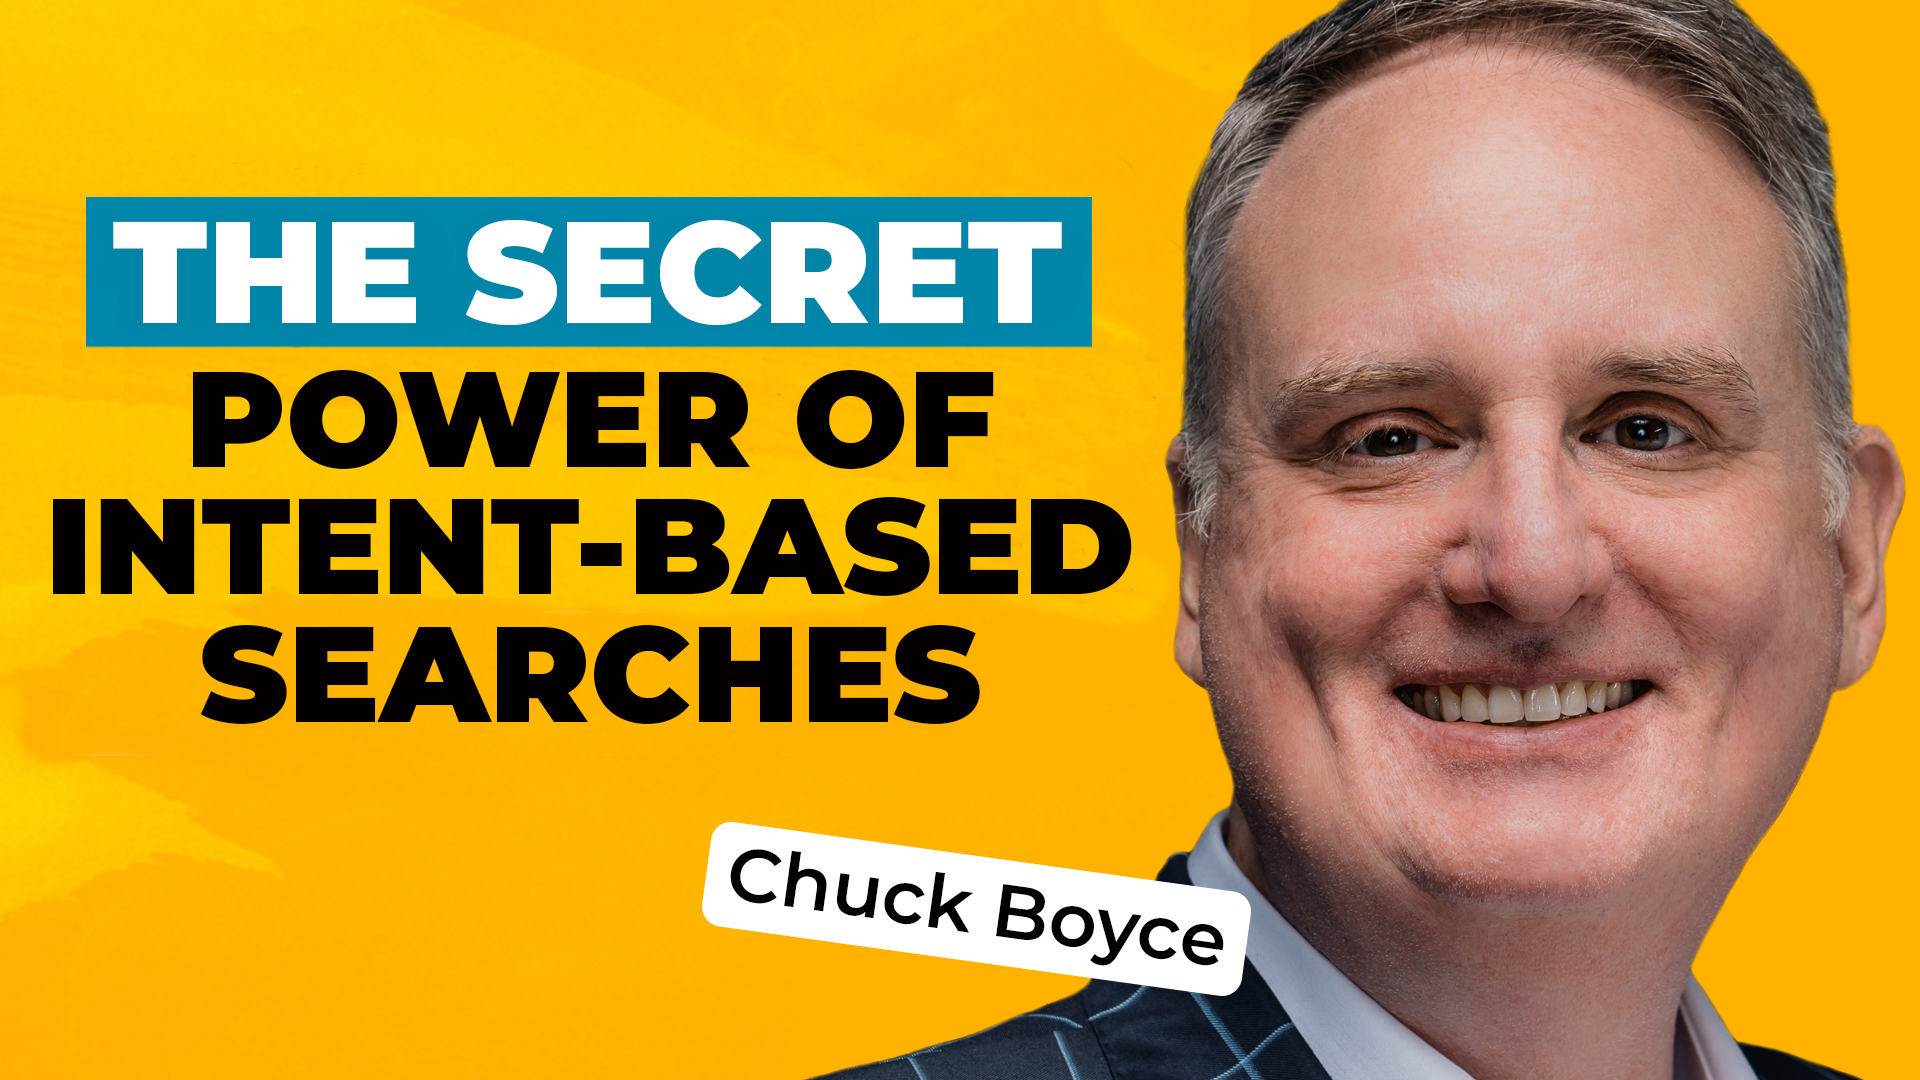 A headshot of Chuck Boyce on a bold yellow background, along with text reading "The Secret Power of Intent-Based Searches."